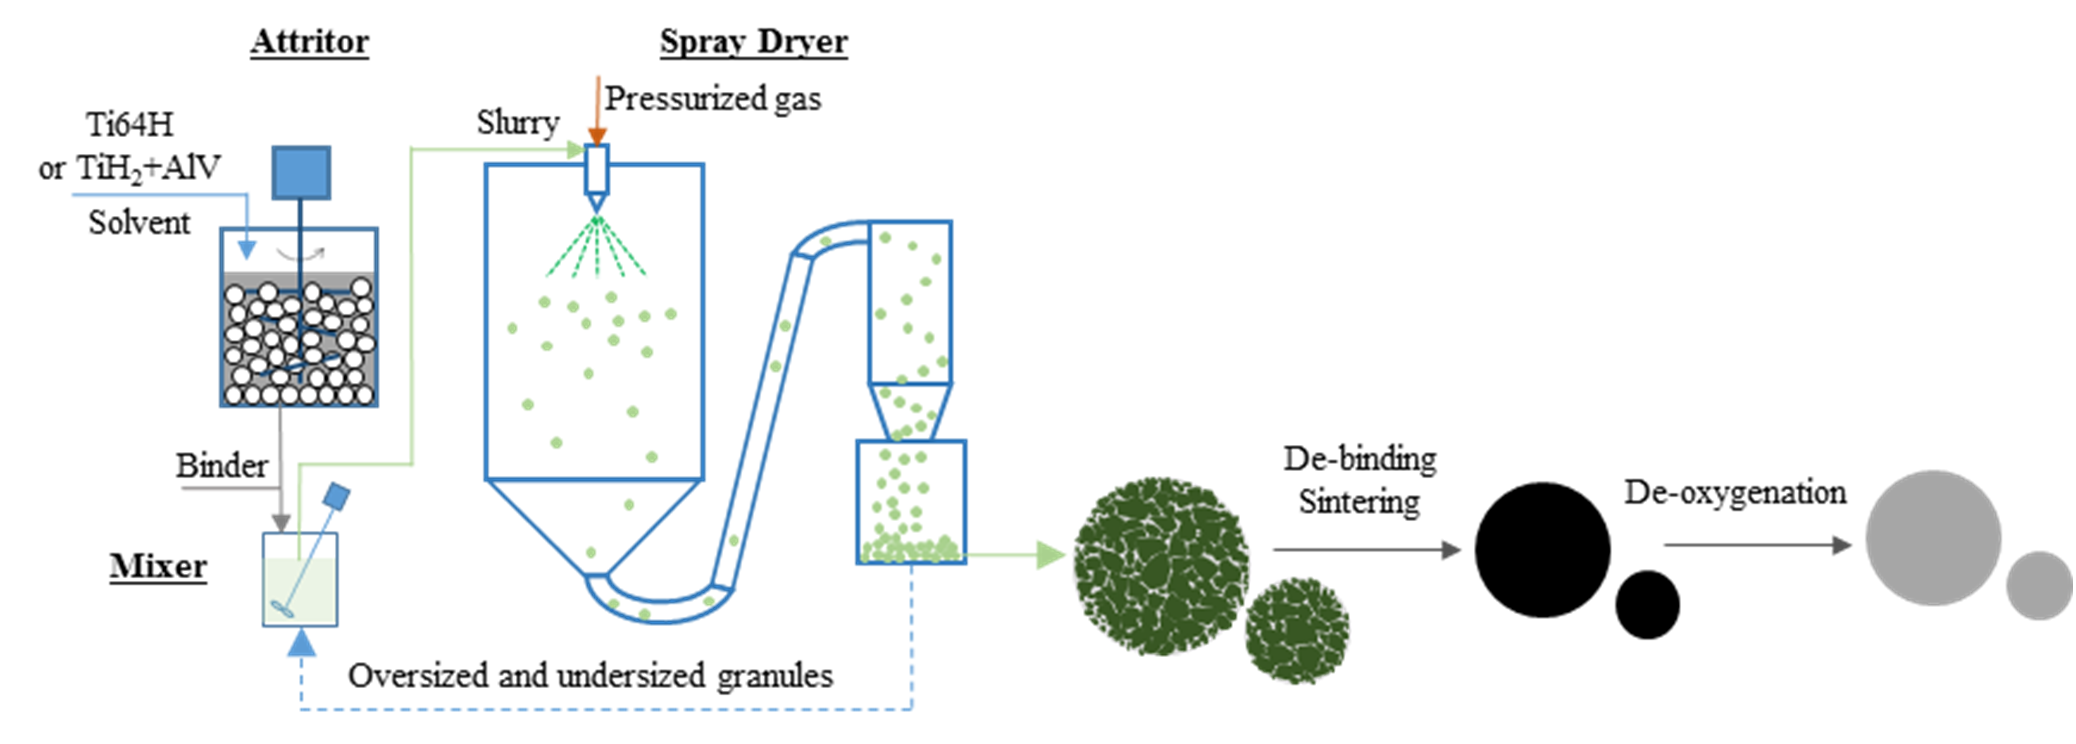 A flow chart outlining the granulation-sintering-deoxygenation process. 